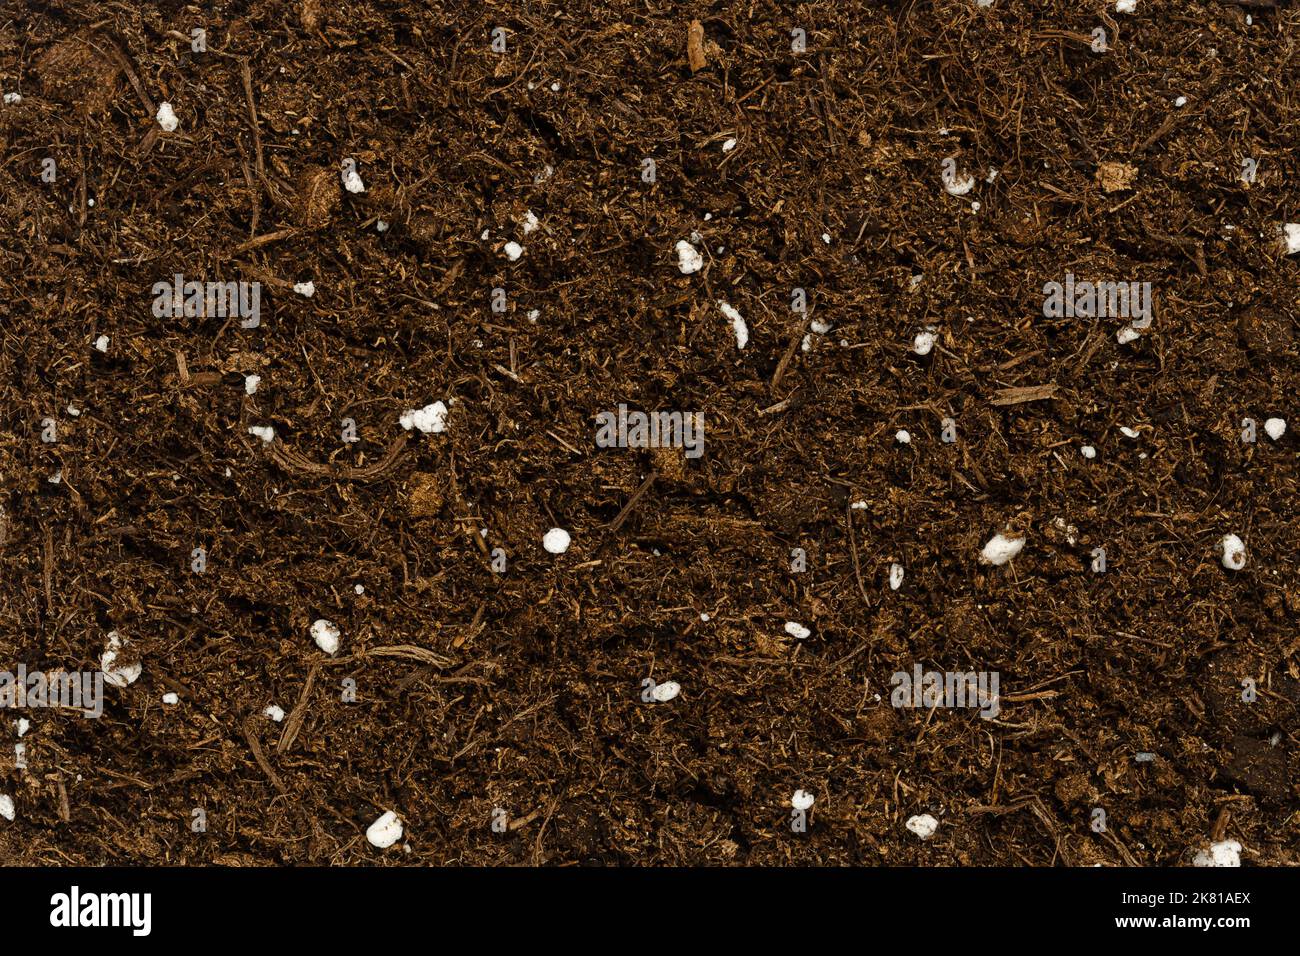 Organic potting compost, background, from above. Soil, growing medium and culture substrate for sowing. Raised bog peat, humus, fibers and fertilizer. Stock Photo